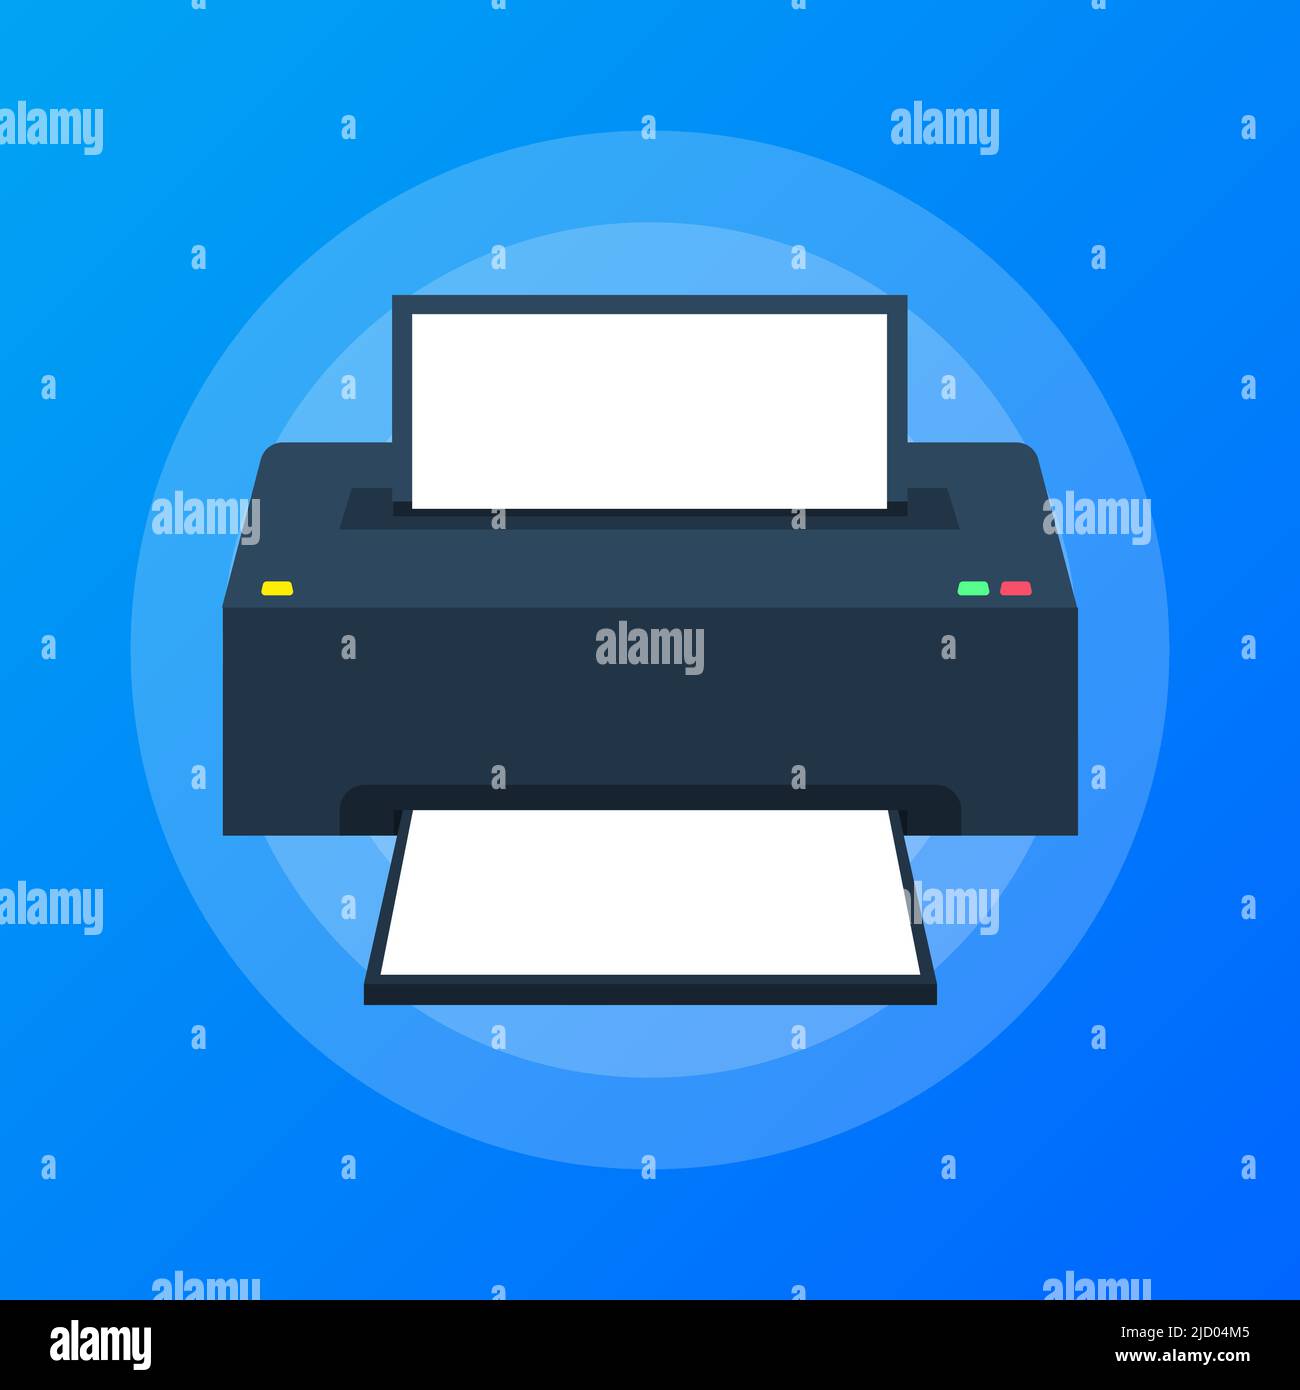 Flat printer icon. printer with paper a4 sheet and printed text document Stock Vector